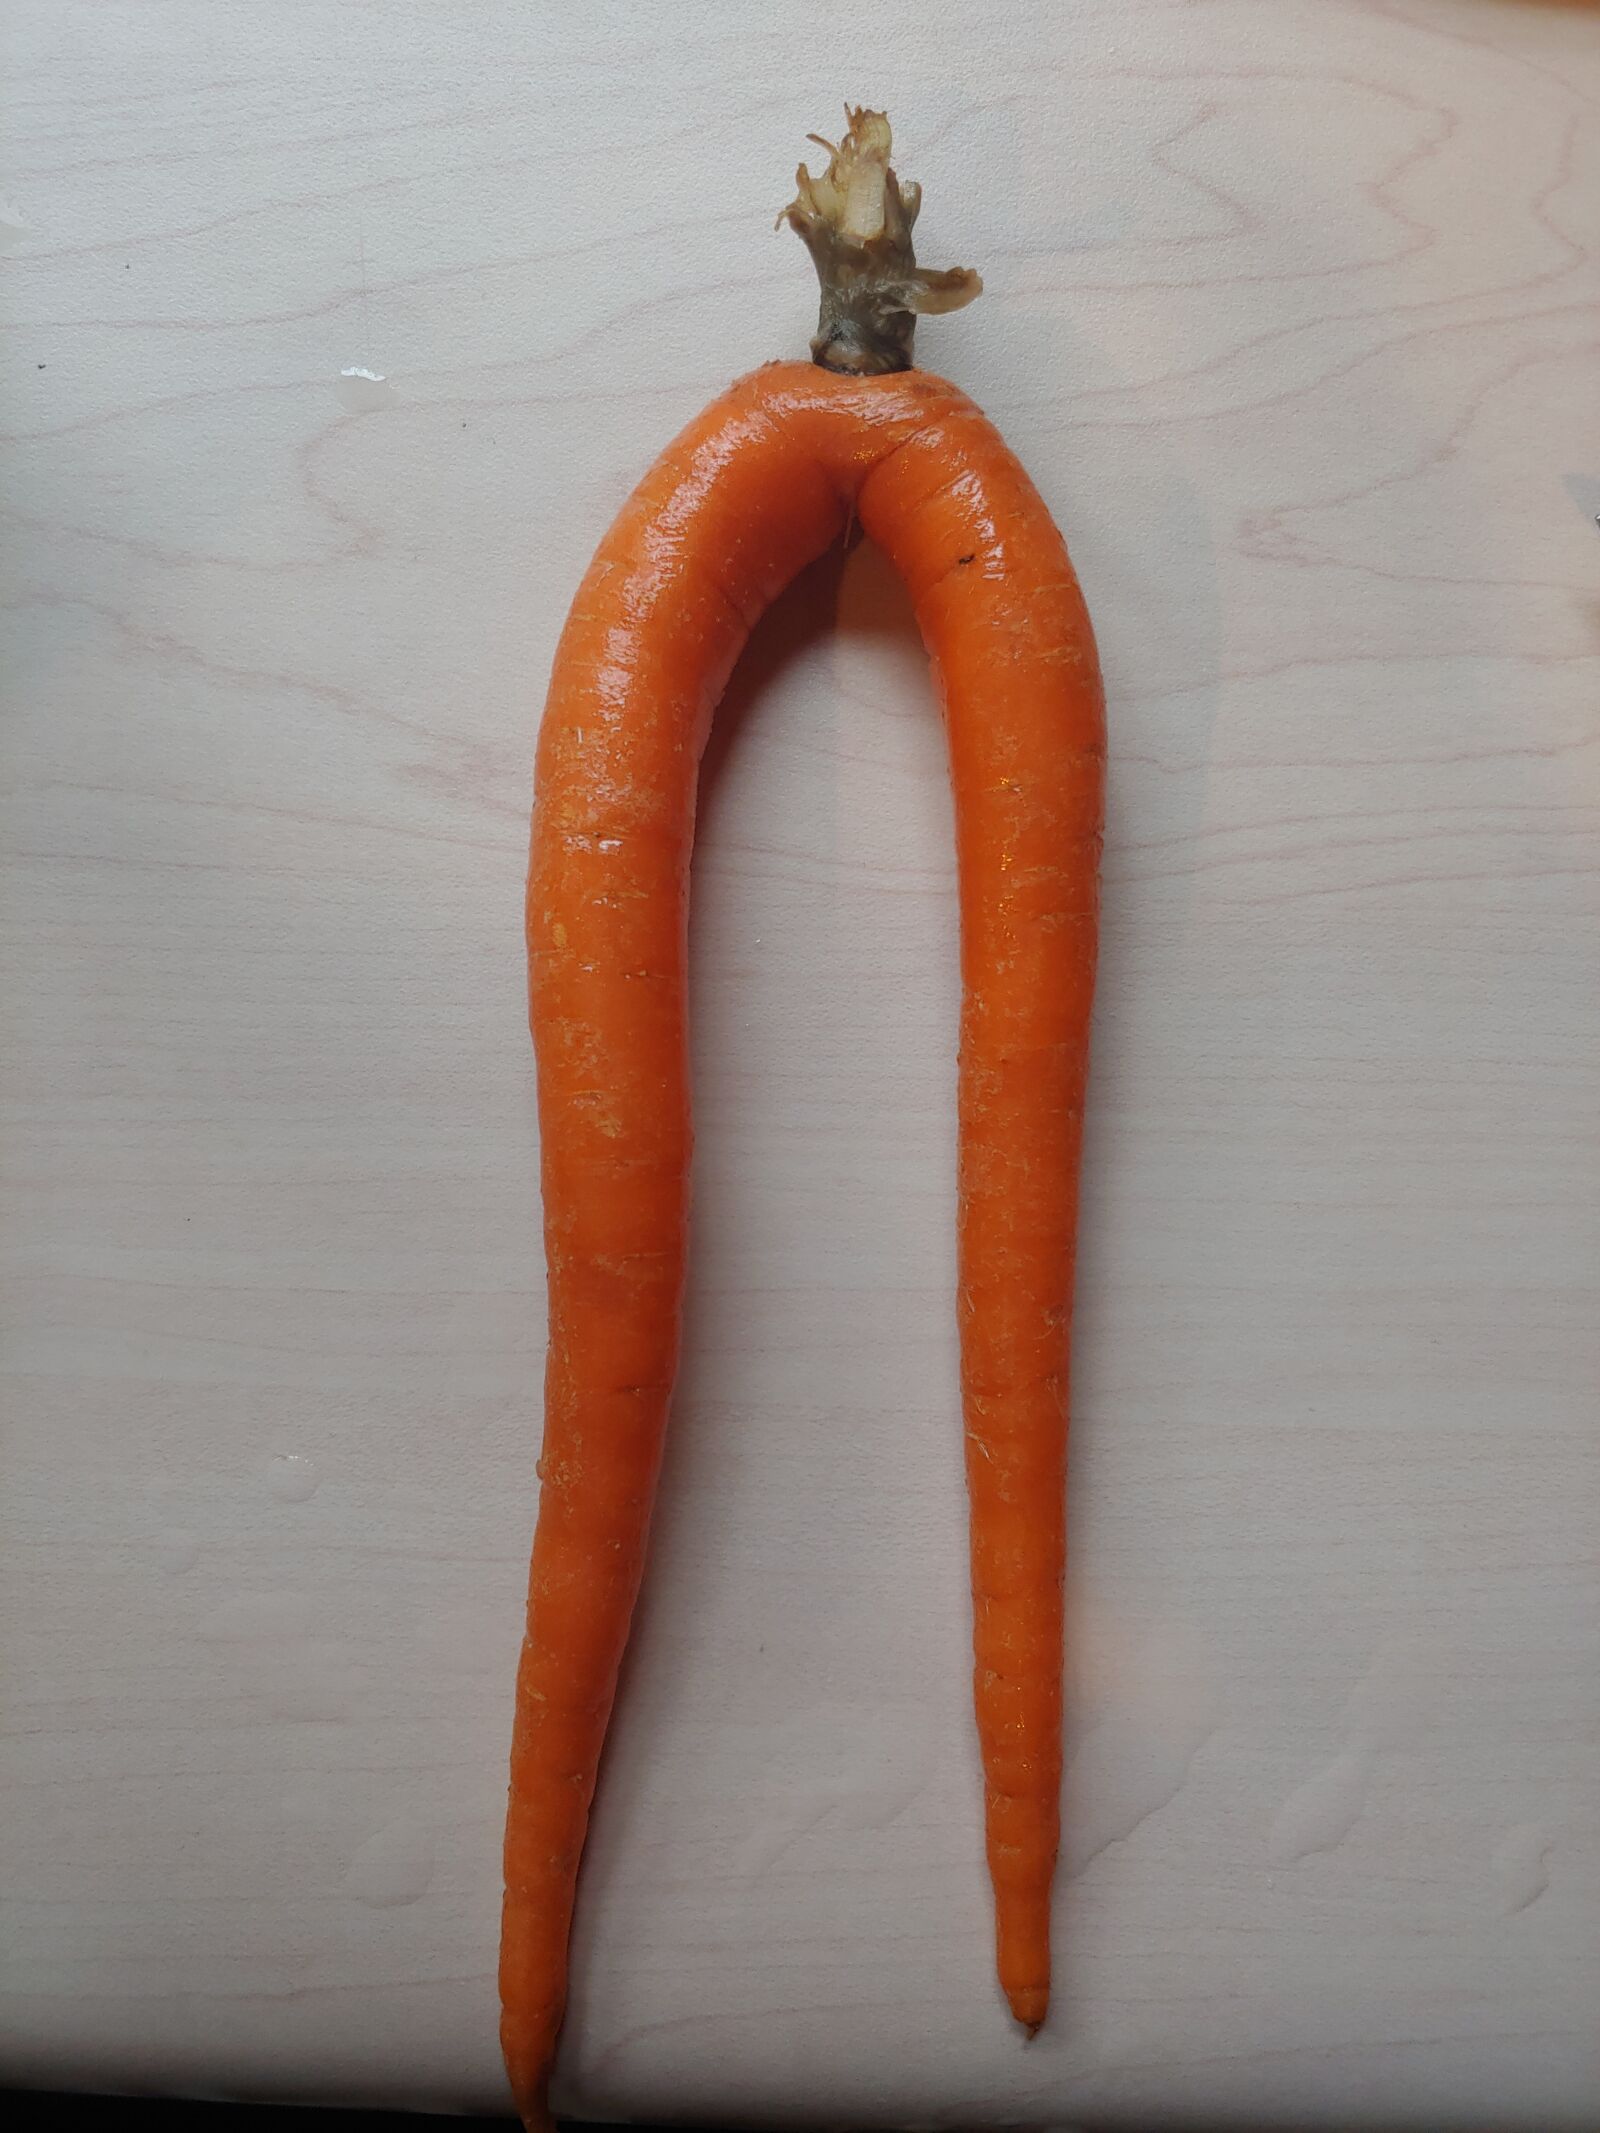 LG G7 THINQ sample photo. Carrot, veggies, quirky photography